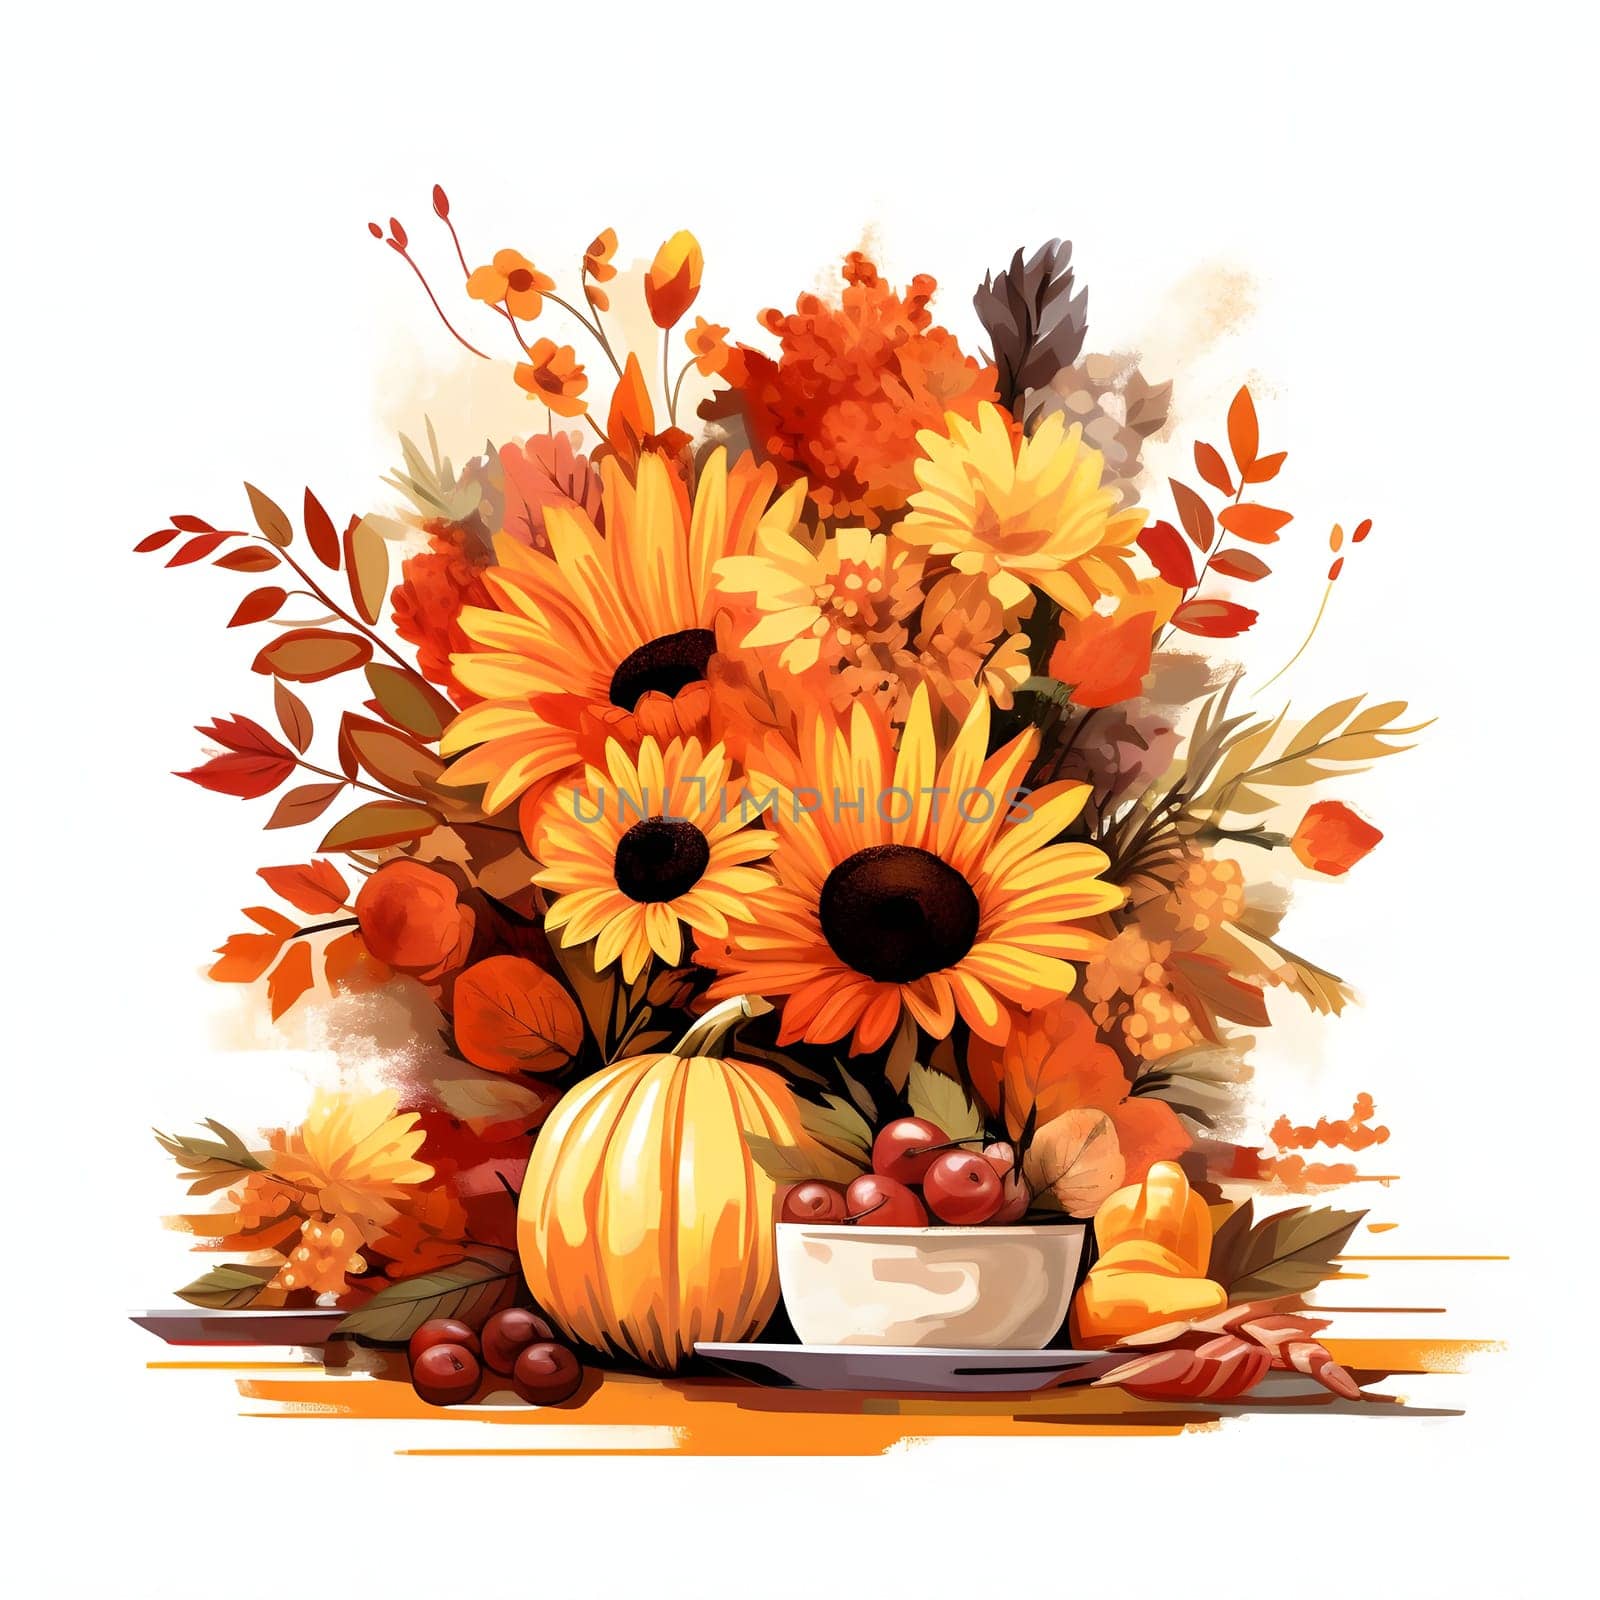 Autumn flowers collected from the field and harvest. Pumpkin as a dish of thanksgiving for the harvest, picture on a white isolated background. Atmosphere of joy and celebration.